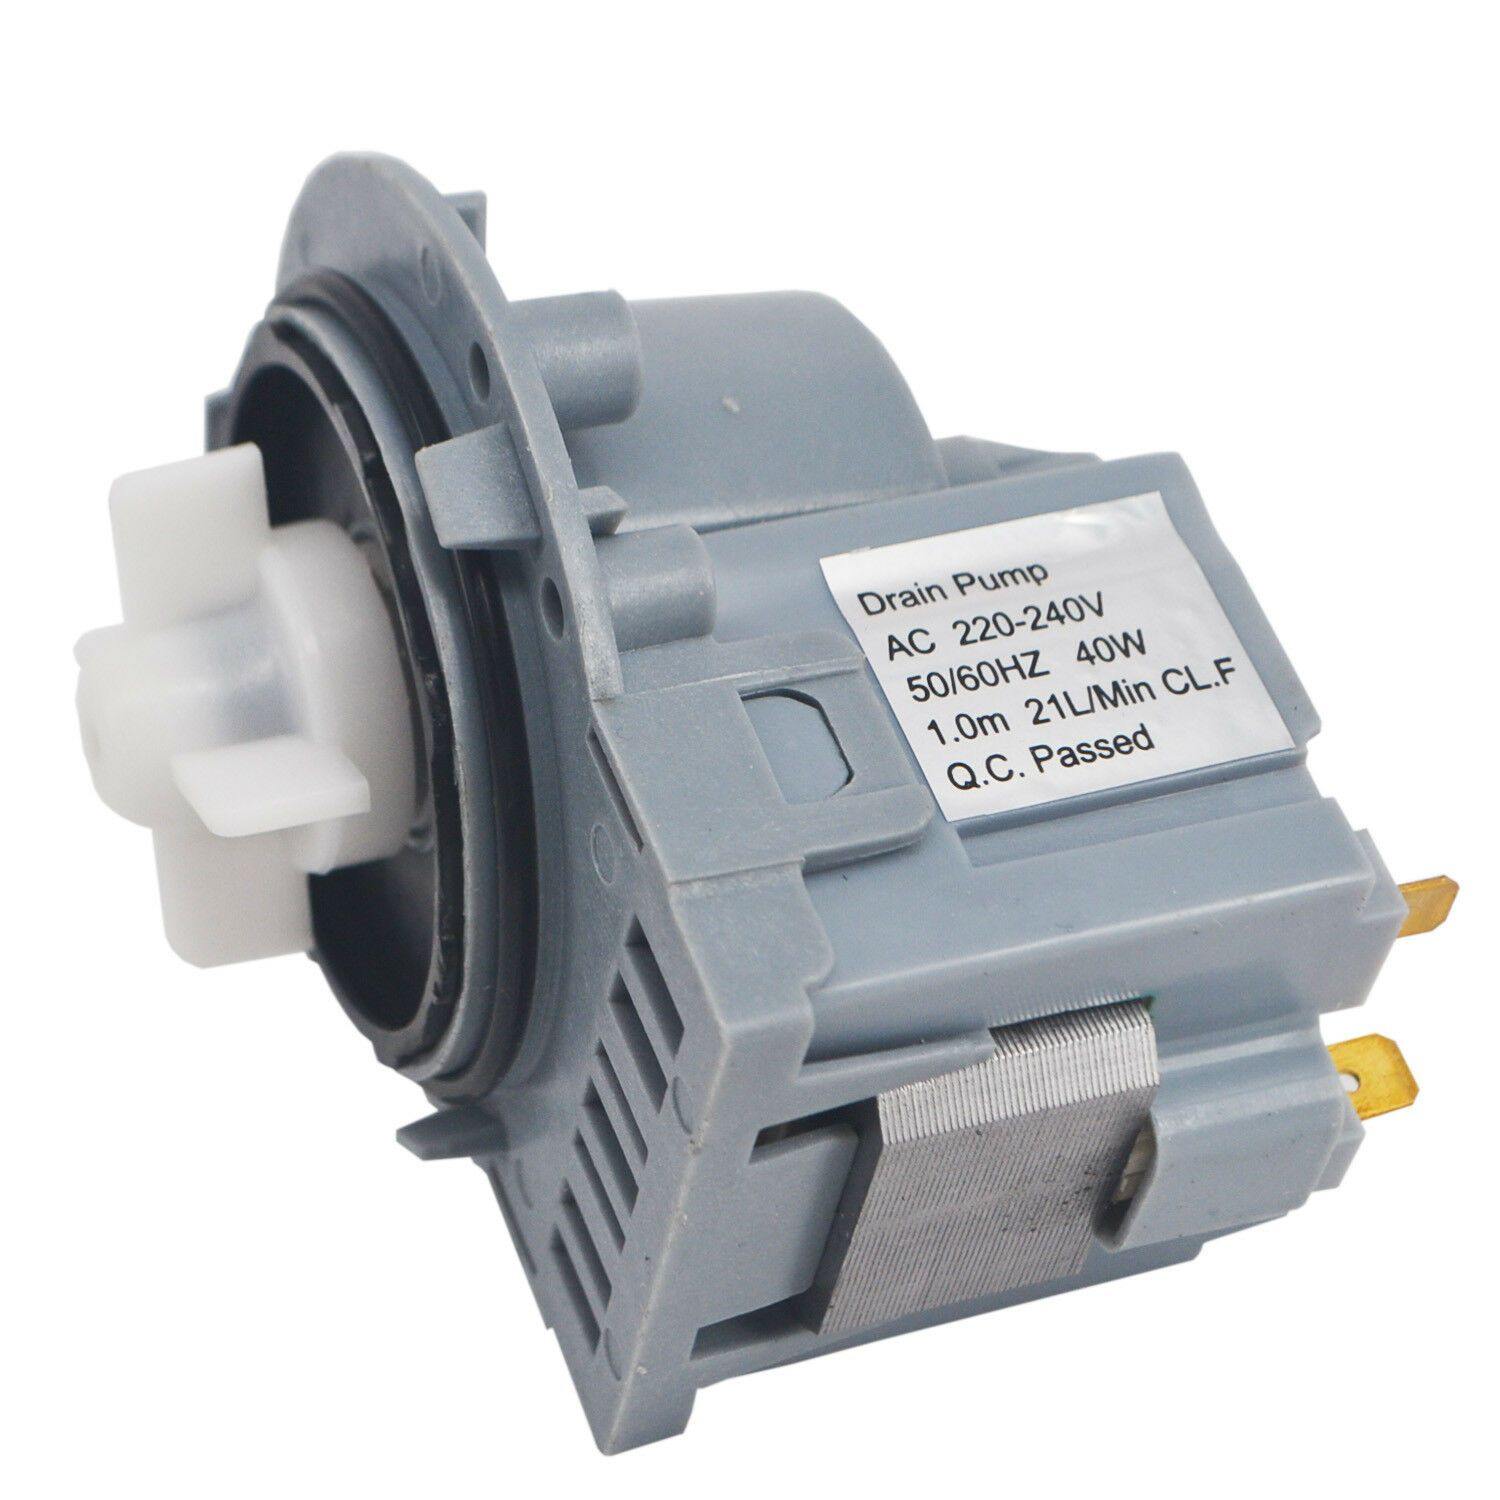 40W Water Drain Pump For LG WD14030RD6 WD-1256RD WD14030FD6 Sparesbarn